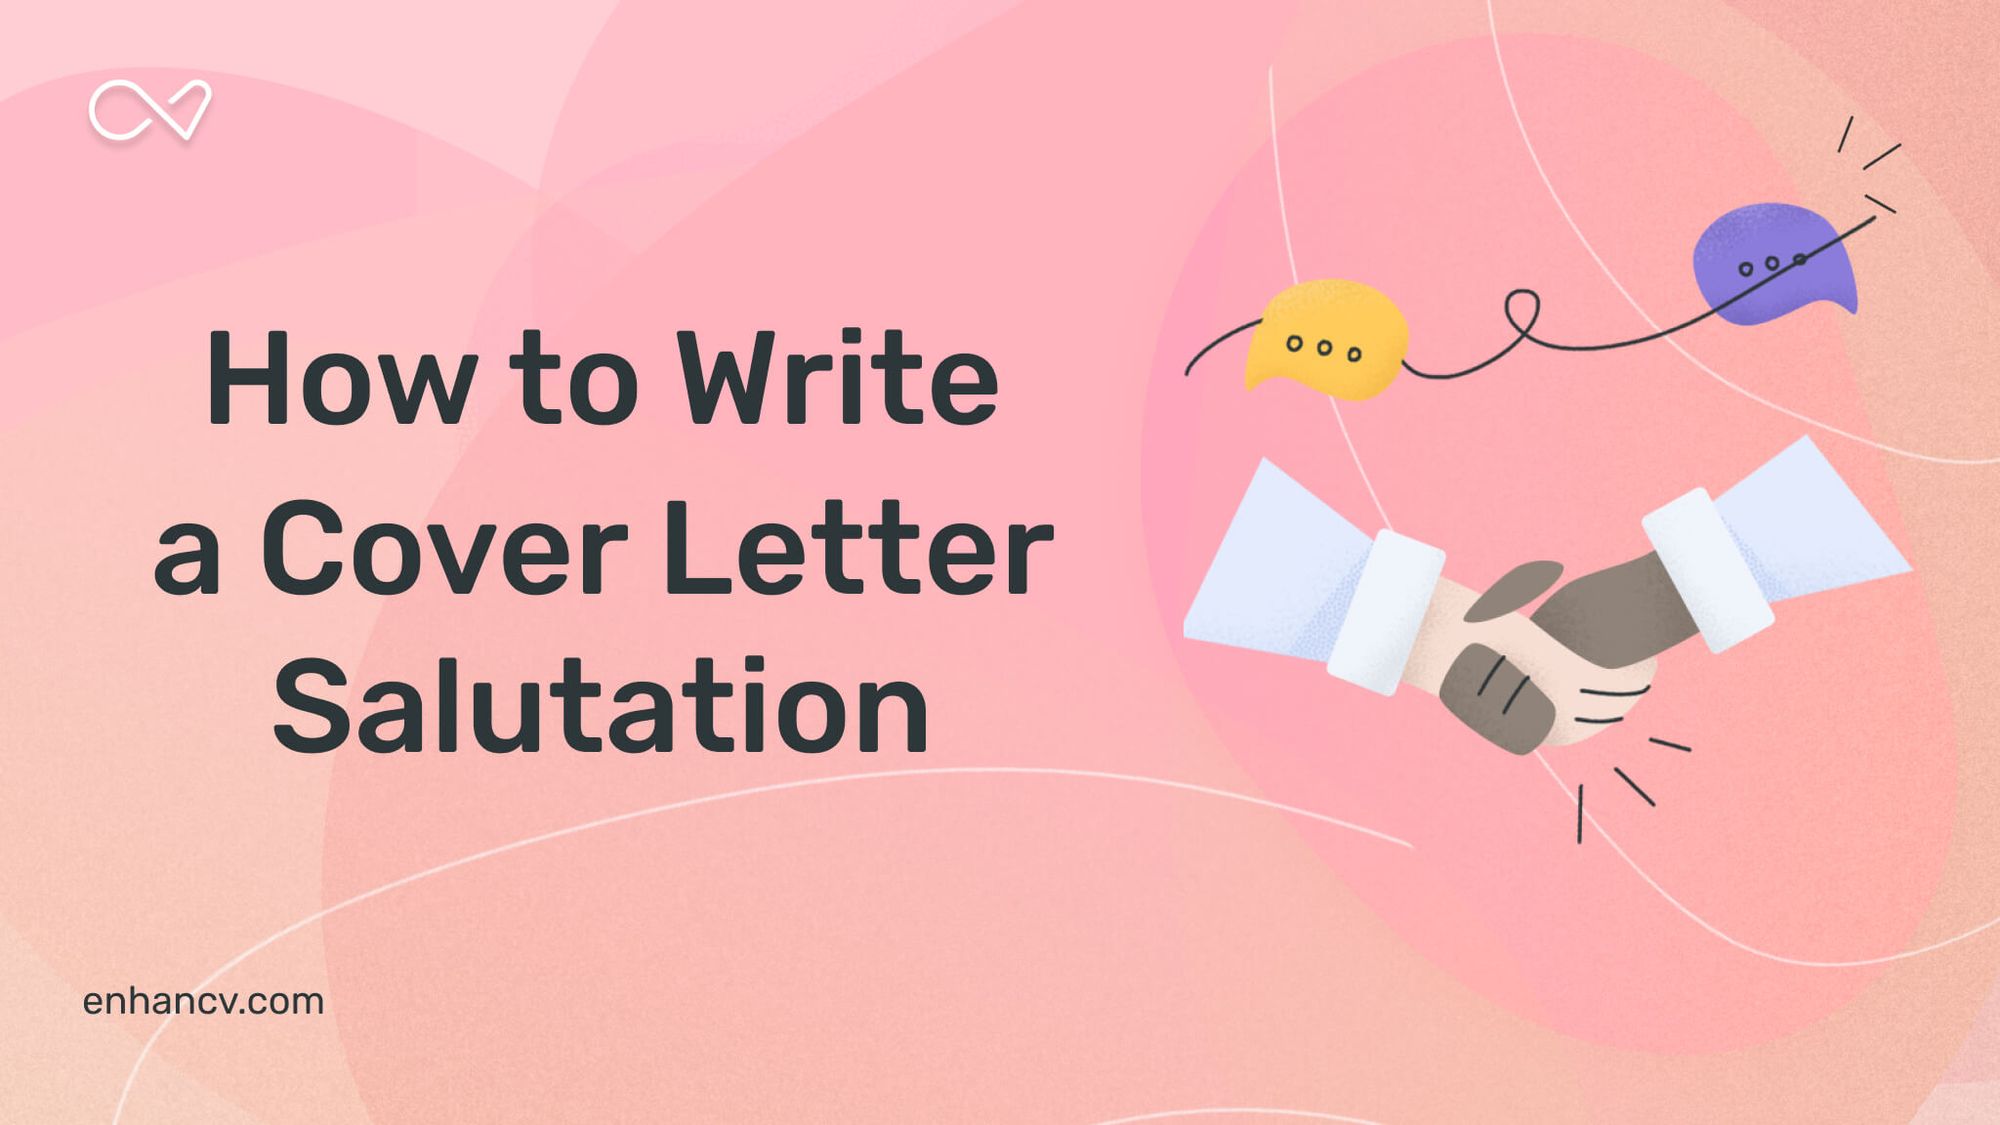 what is the salutation for cover letter